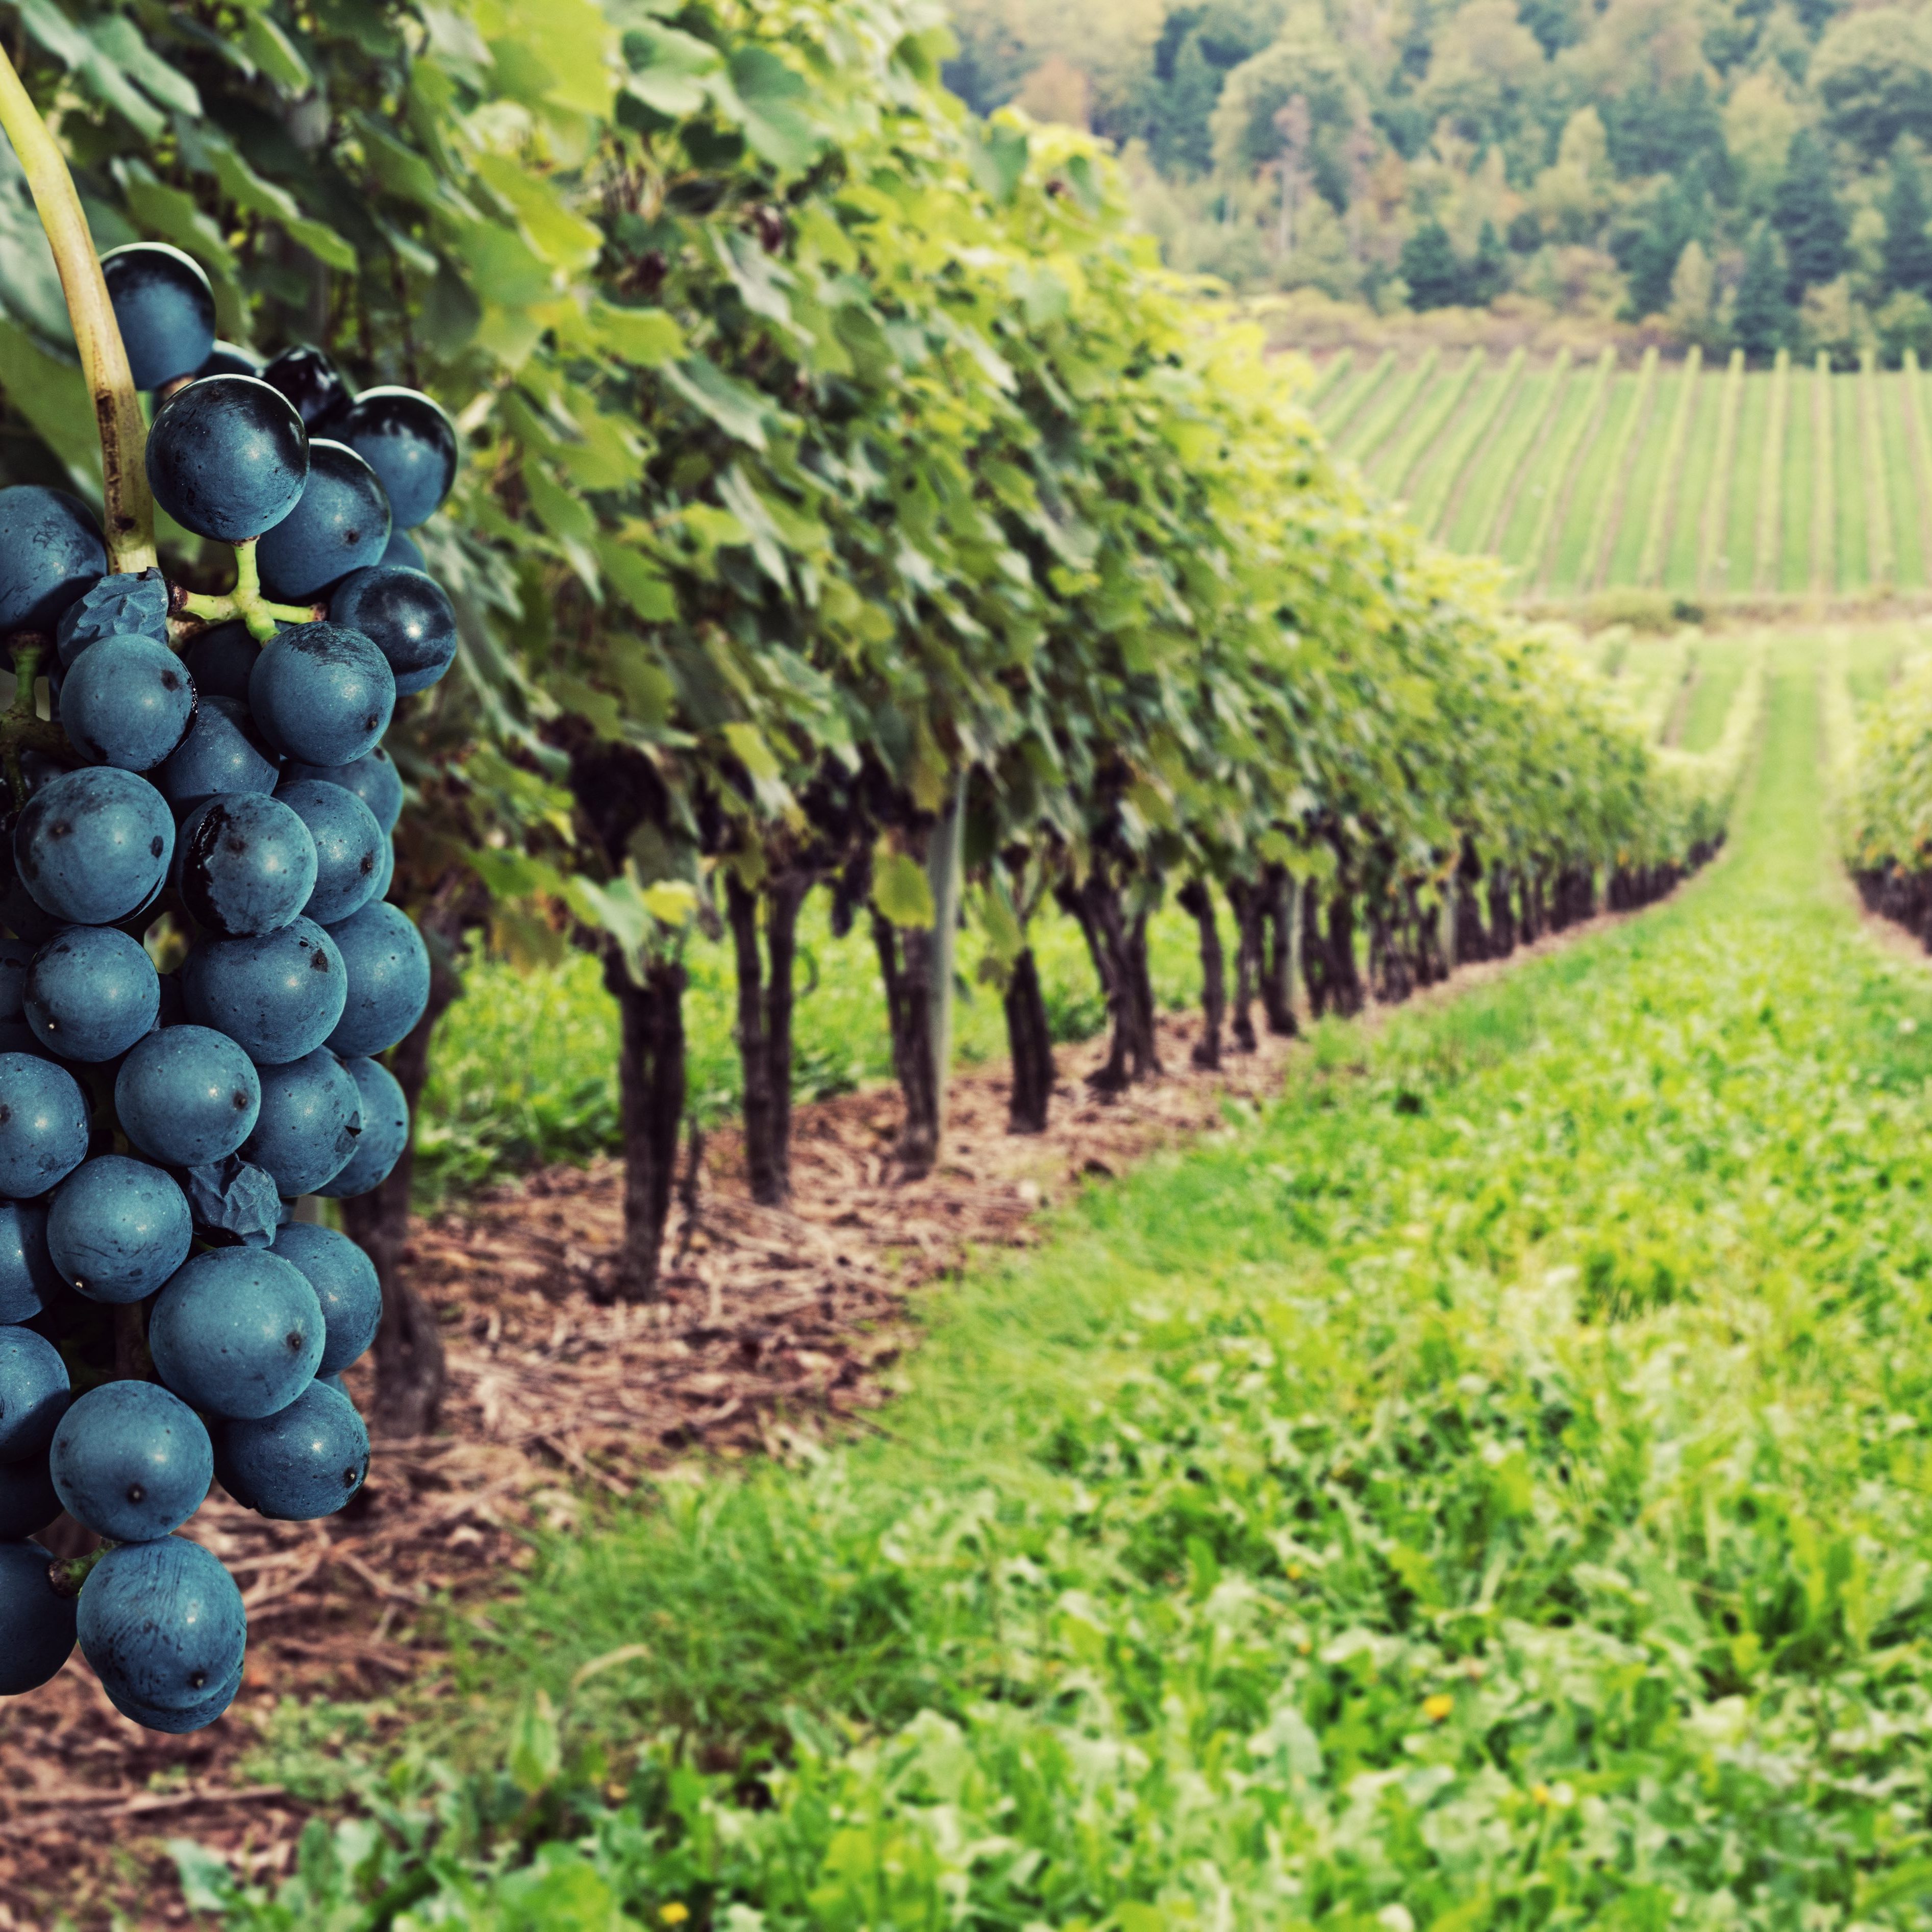 Ripe grapes hang from rows of vines.  Composite image.